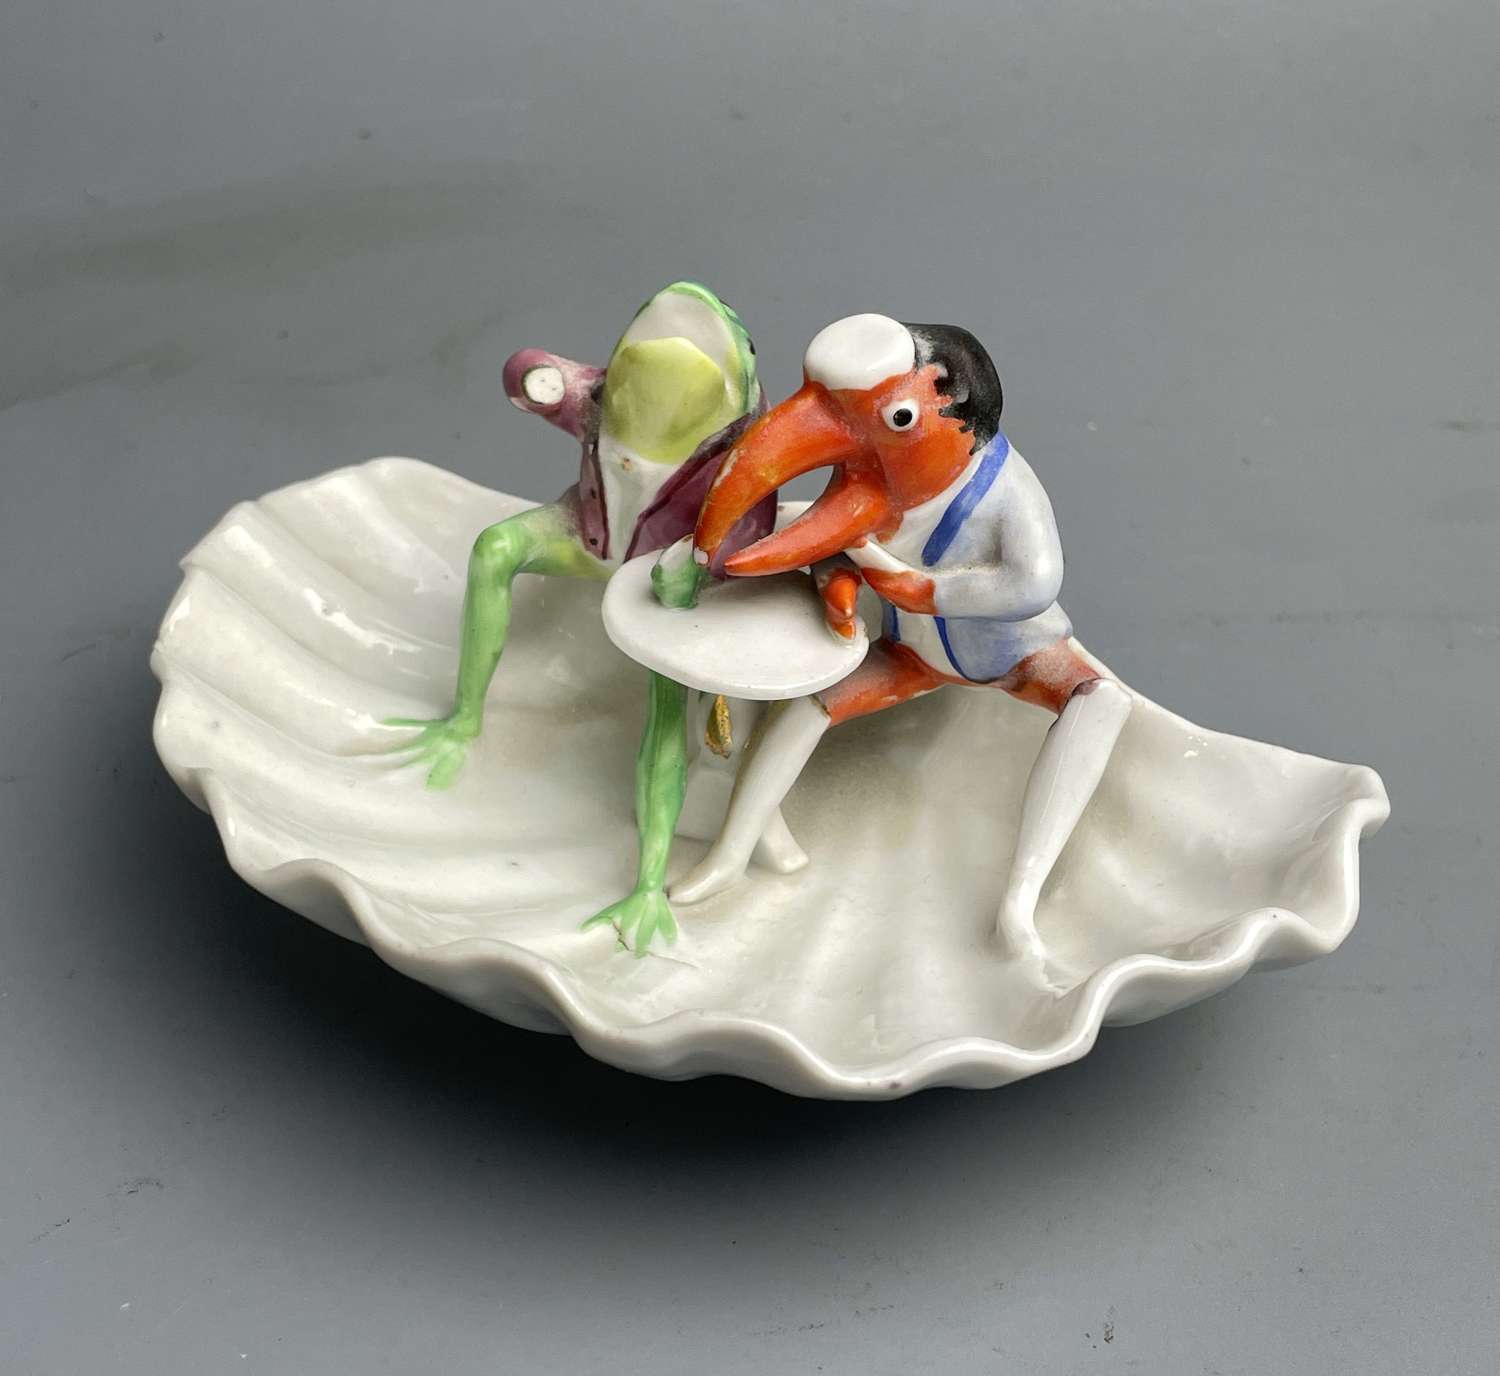 Continental Novelty Porcelain Dish of a Frog & Lobster in Costume